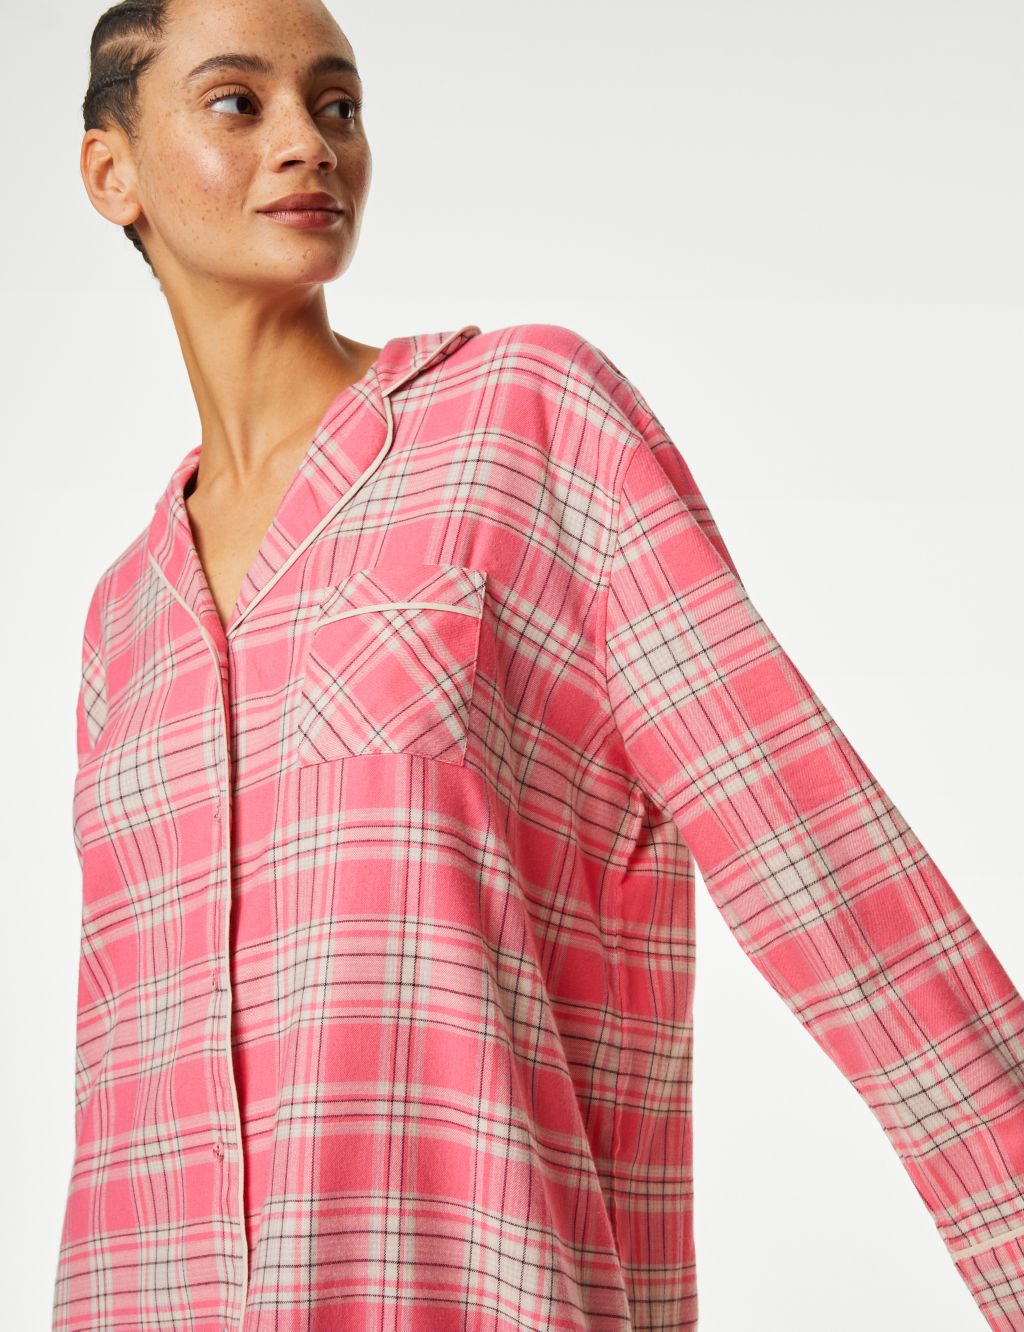 Cotton Blend Checked Nightshirt image 3